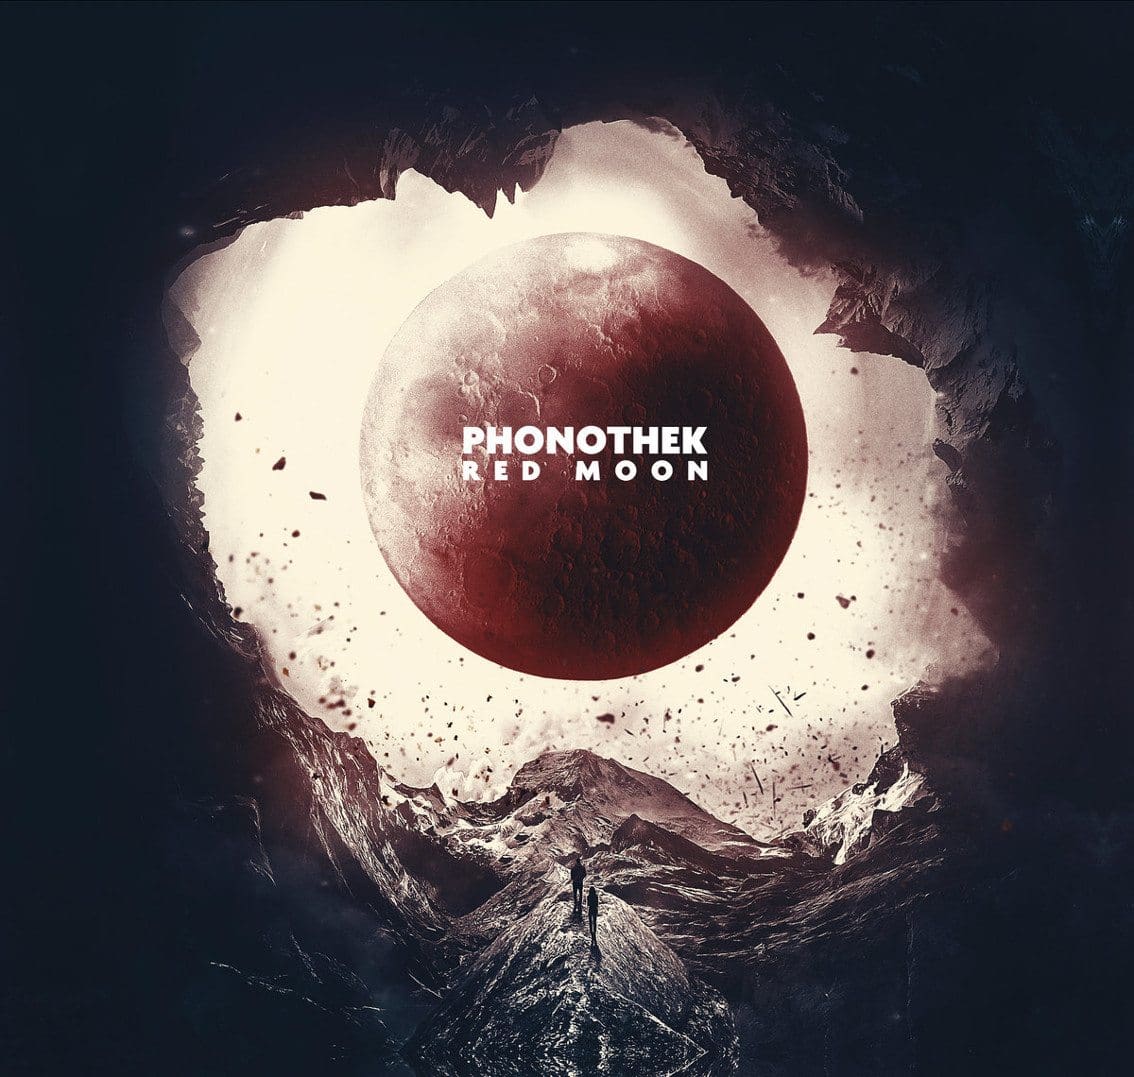 Phonothek issues 2nd album'Red Moon' on Cryo Chamber - preview it on Side-Line